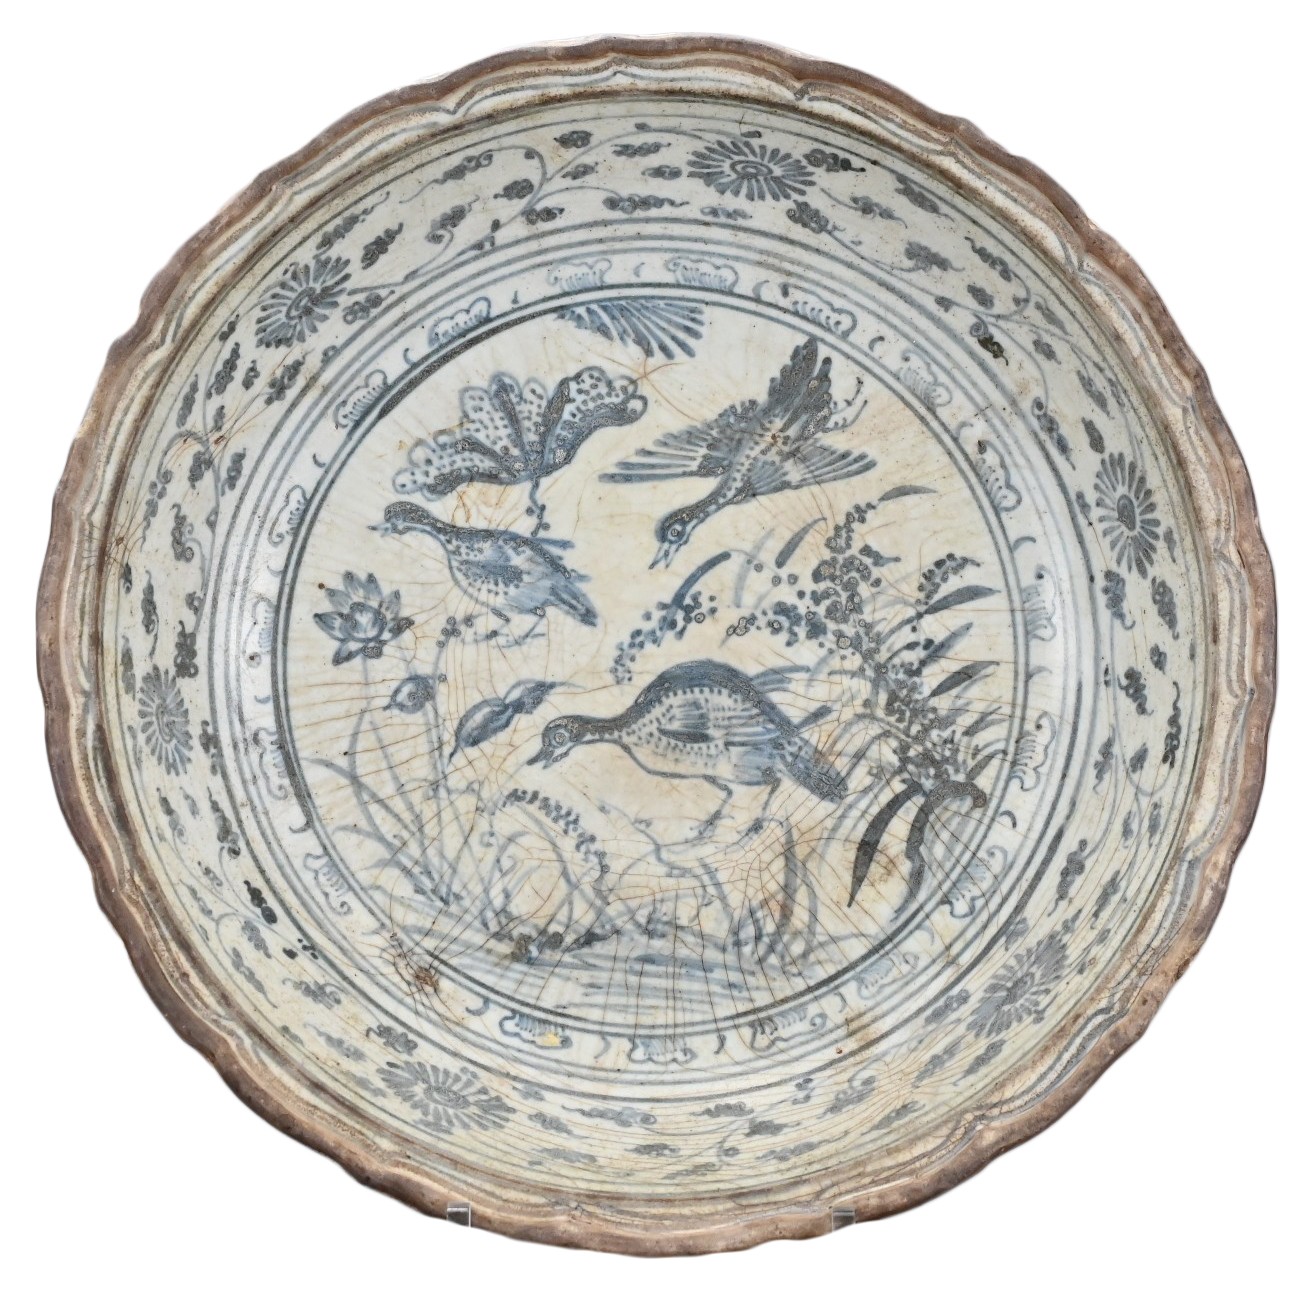 A LARGE VIETNAMESE BLUE AND WHITE CERAMIC DISH, 16TH CENTURY. The deep heavily-potted bracket